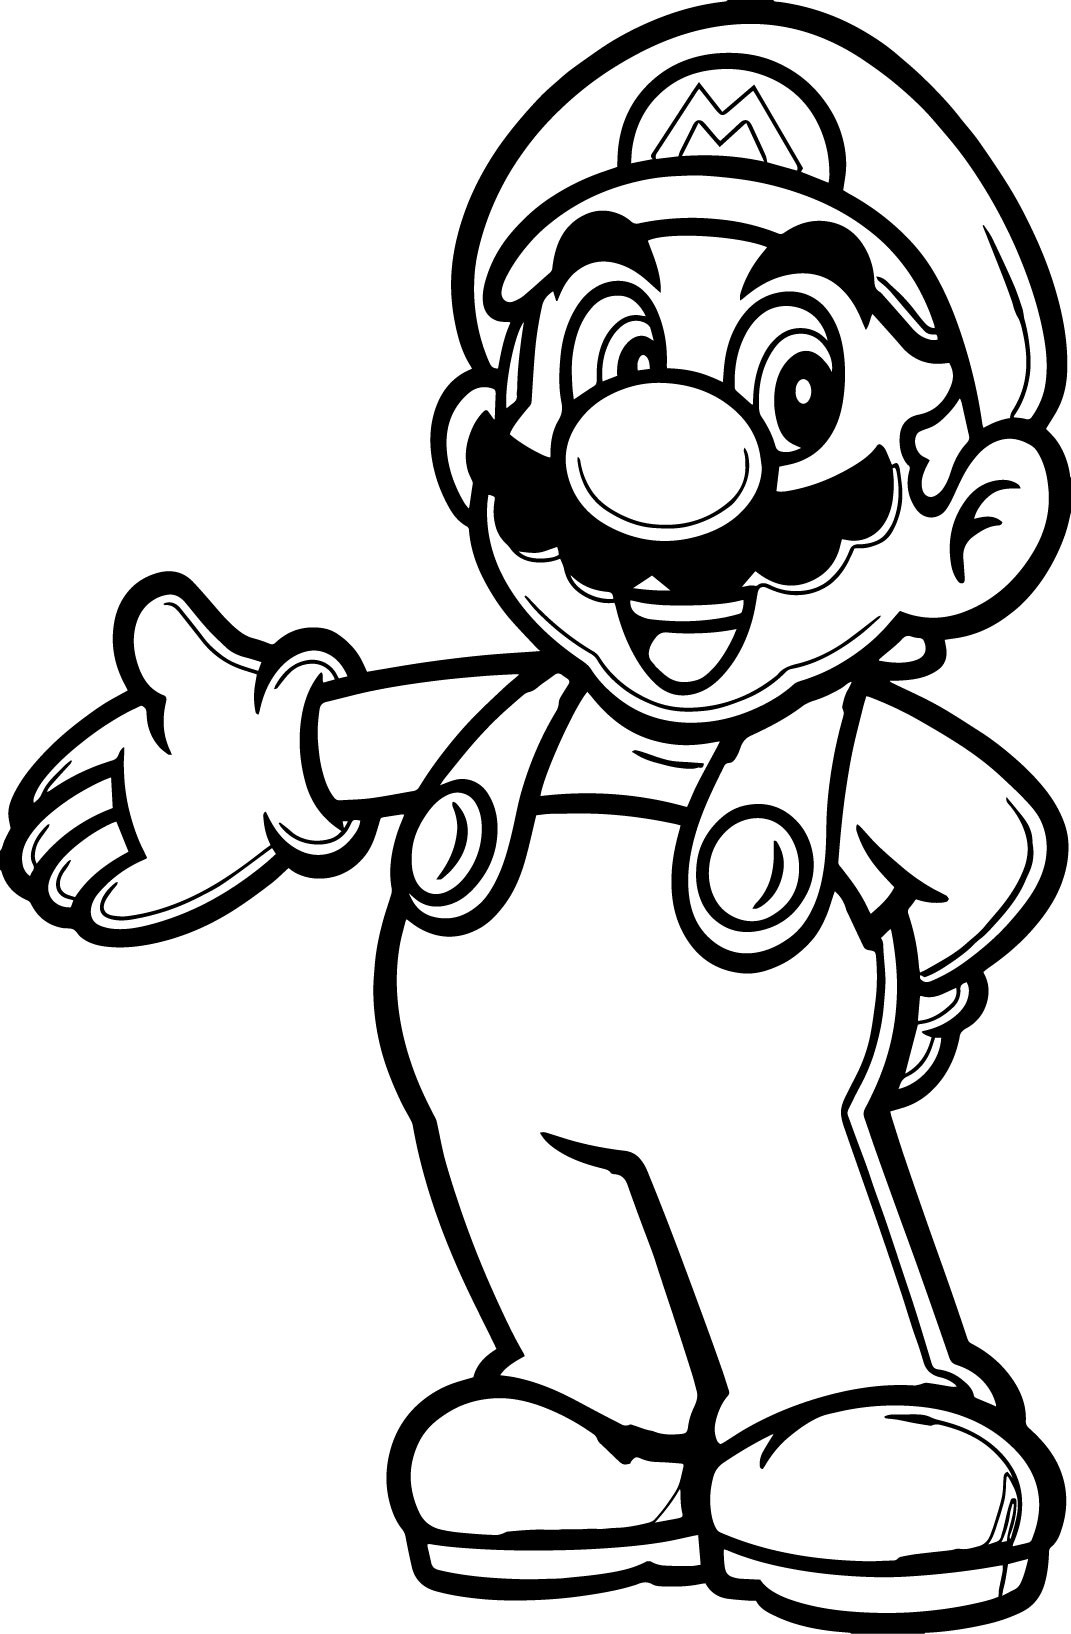 Super Mario Brothers Coloring Pages
 Super Mario Bros Coloring Pages coloringsuite